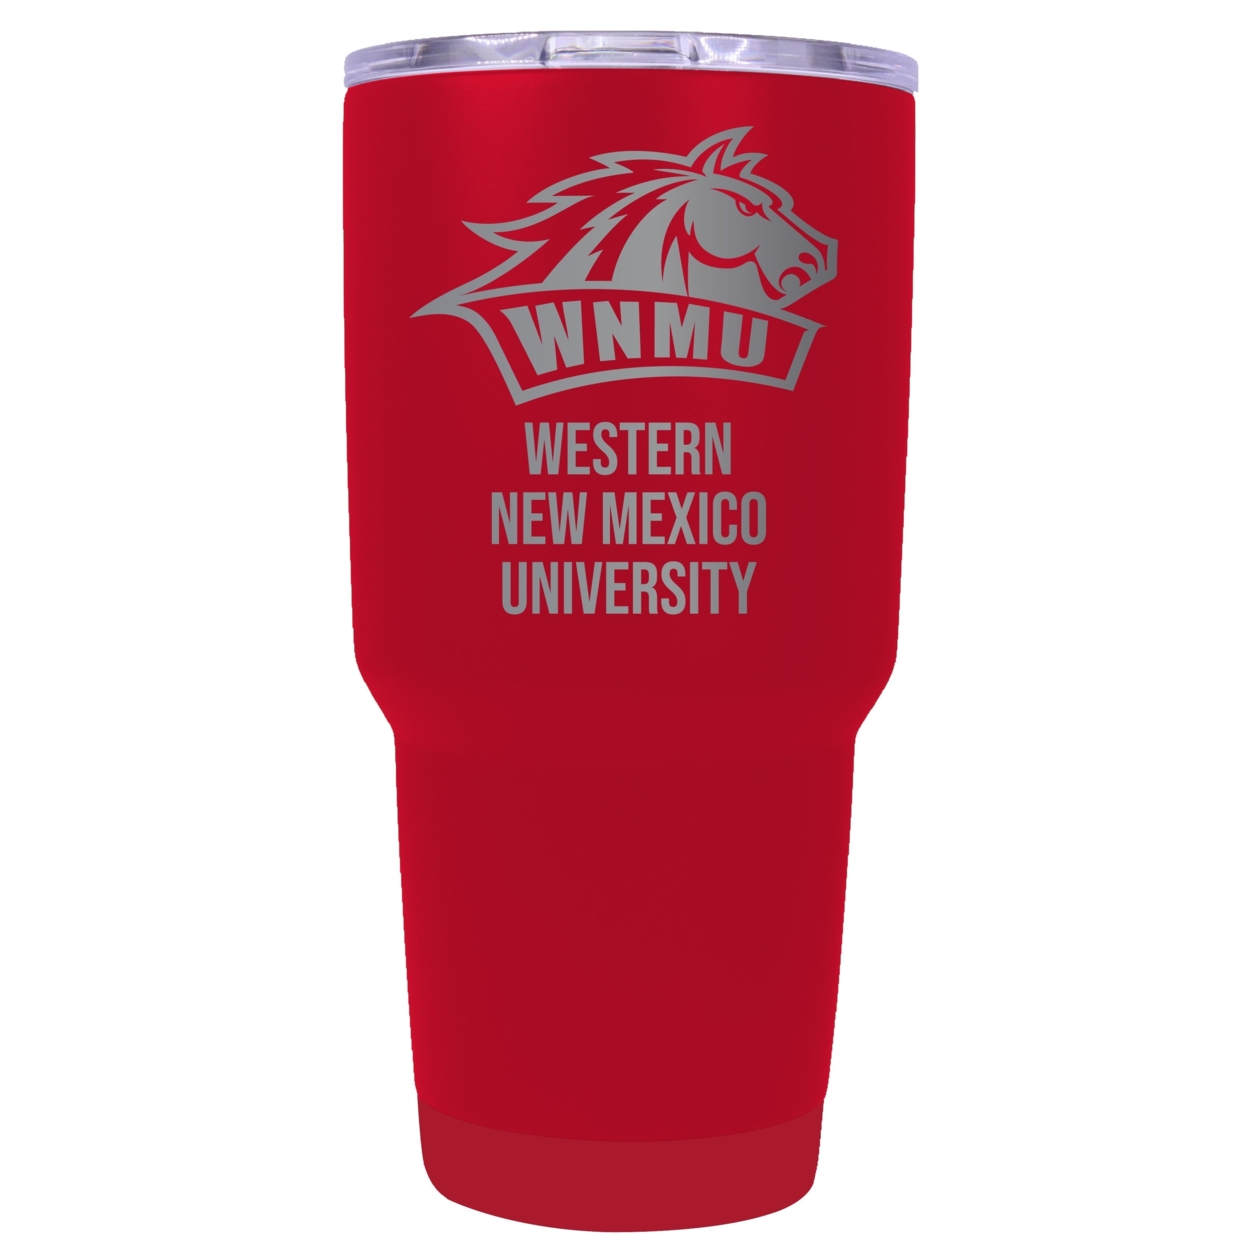 Western New Mexico University 24 Oz Laser Engraved Stainless Steel Insulated Tumbler - Choose Your Color. - Navy